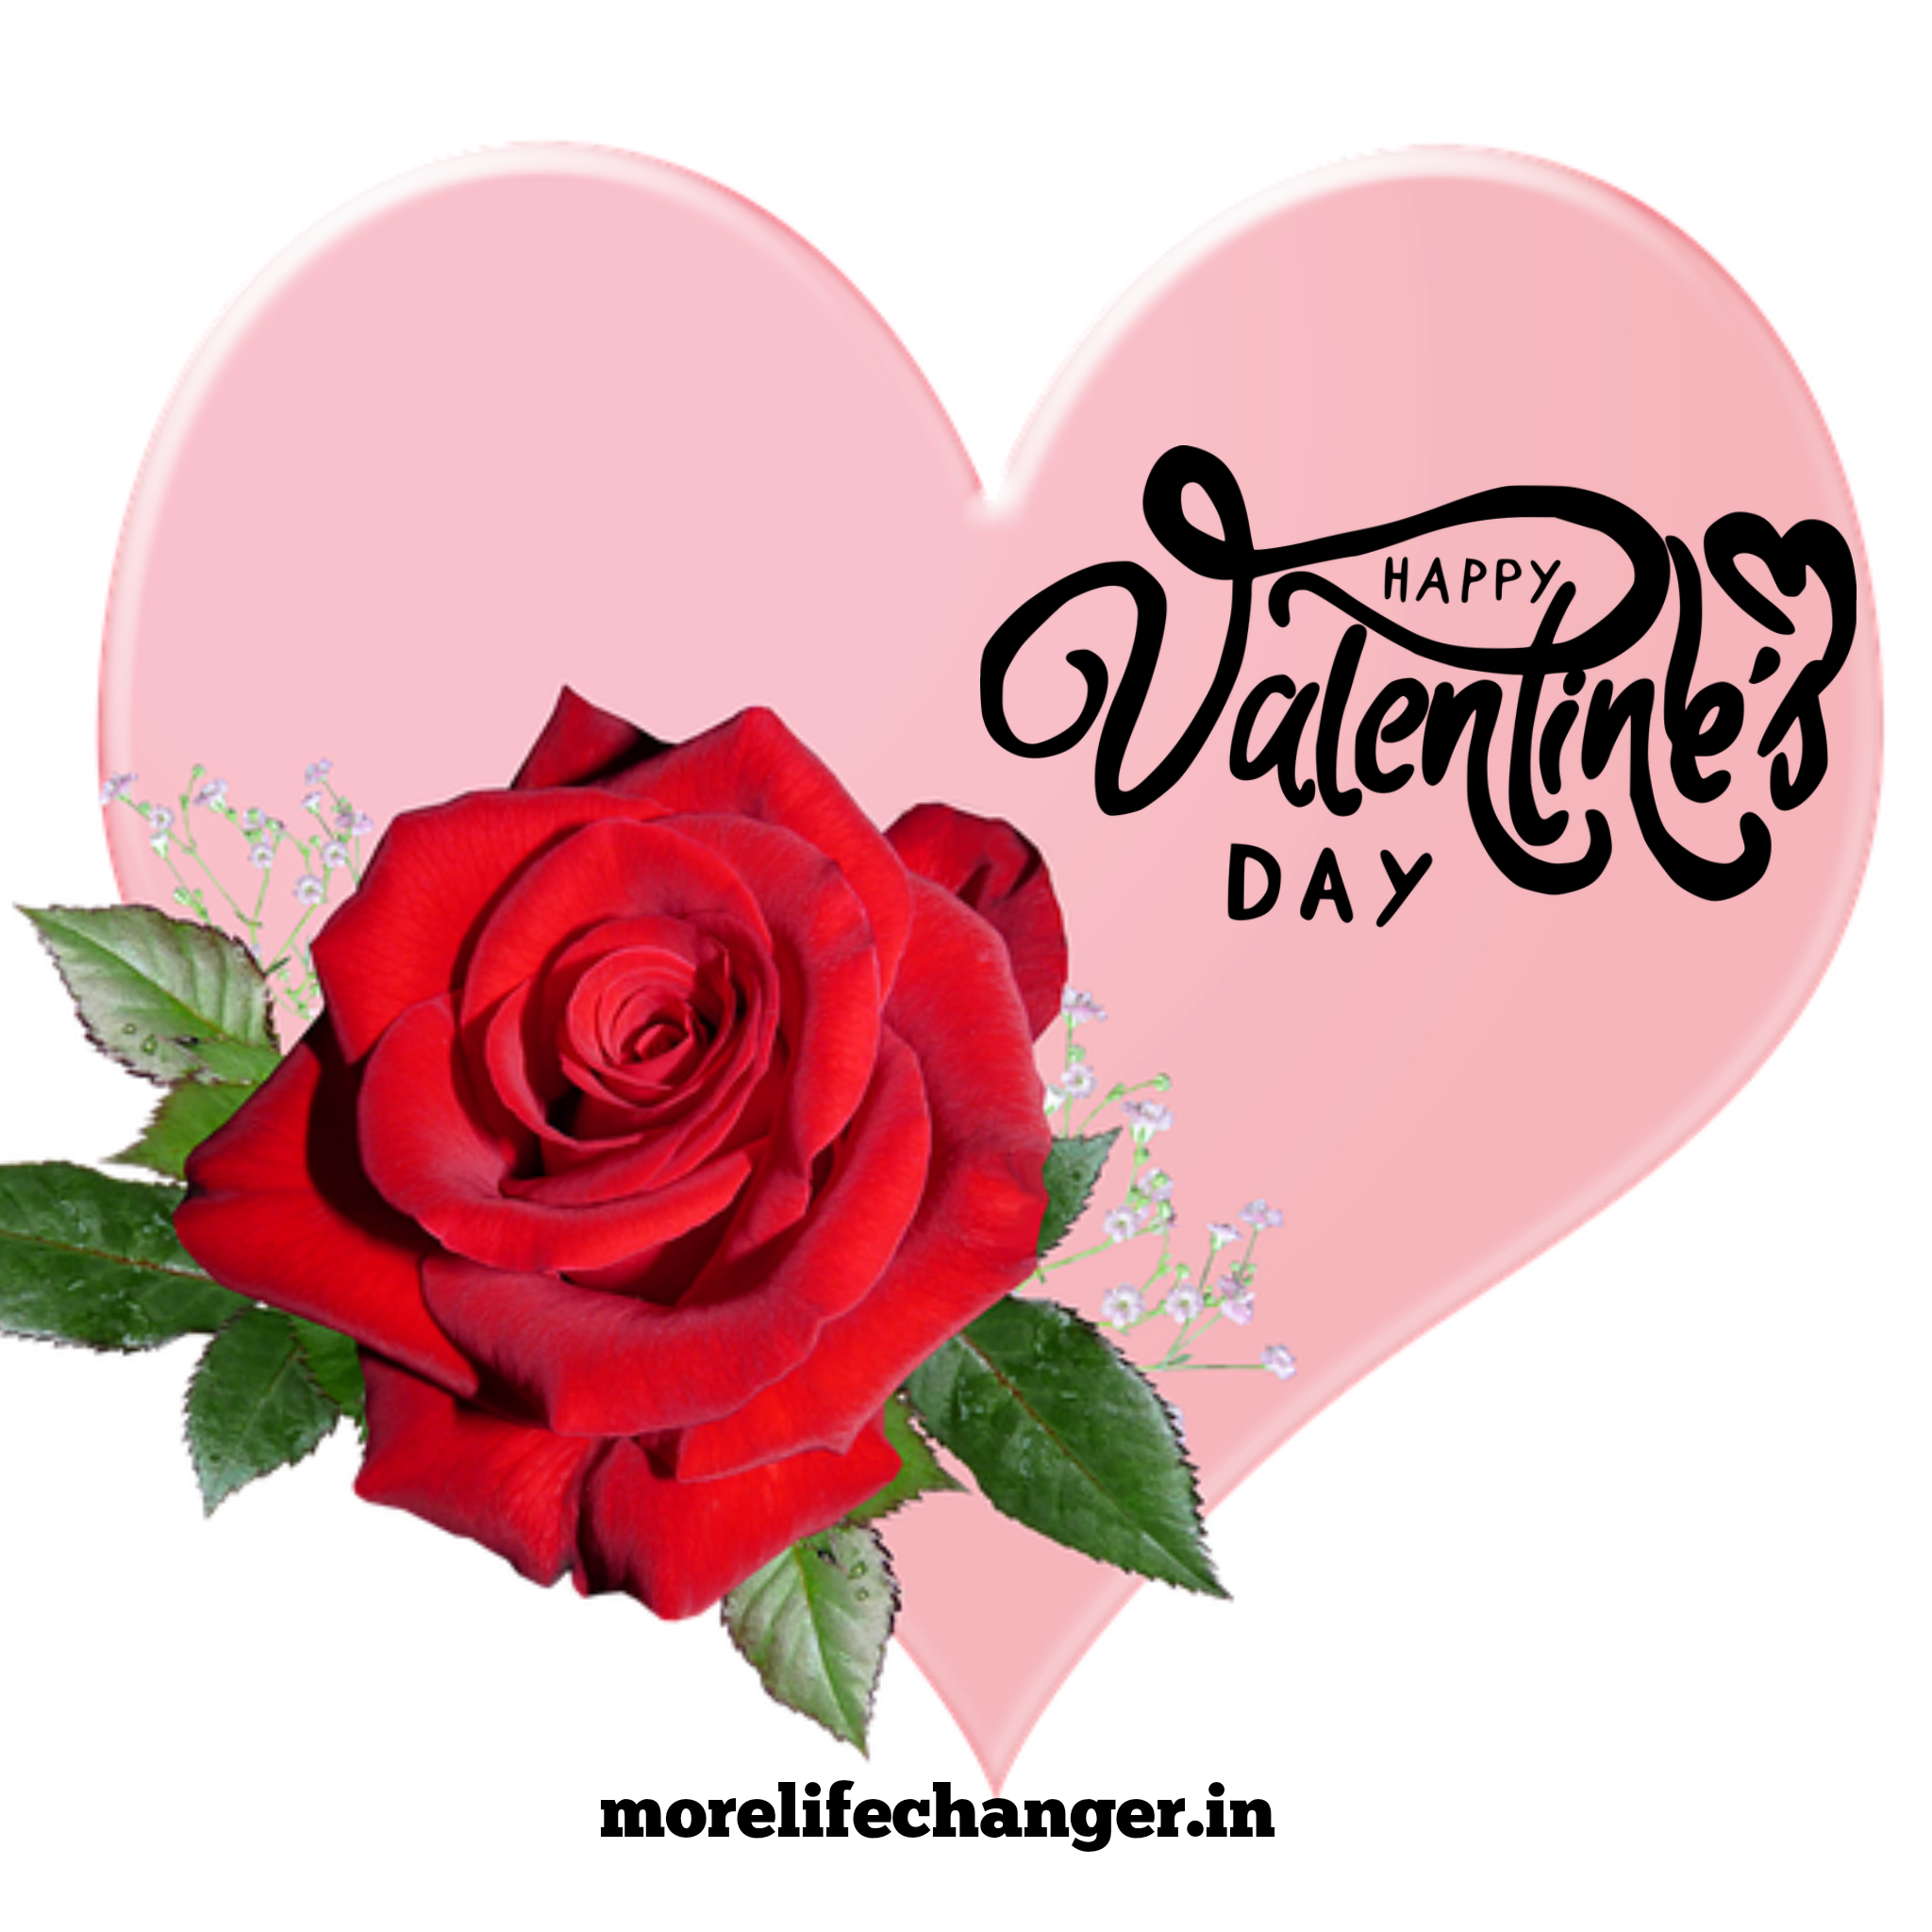 Happy Valentine's Day Quotes with love - More life changer